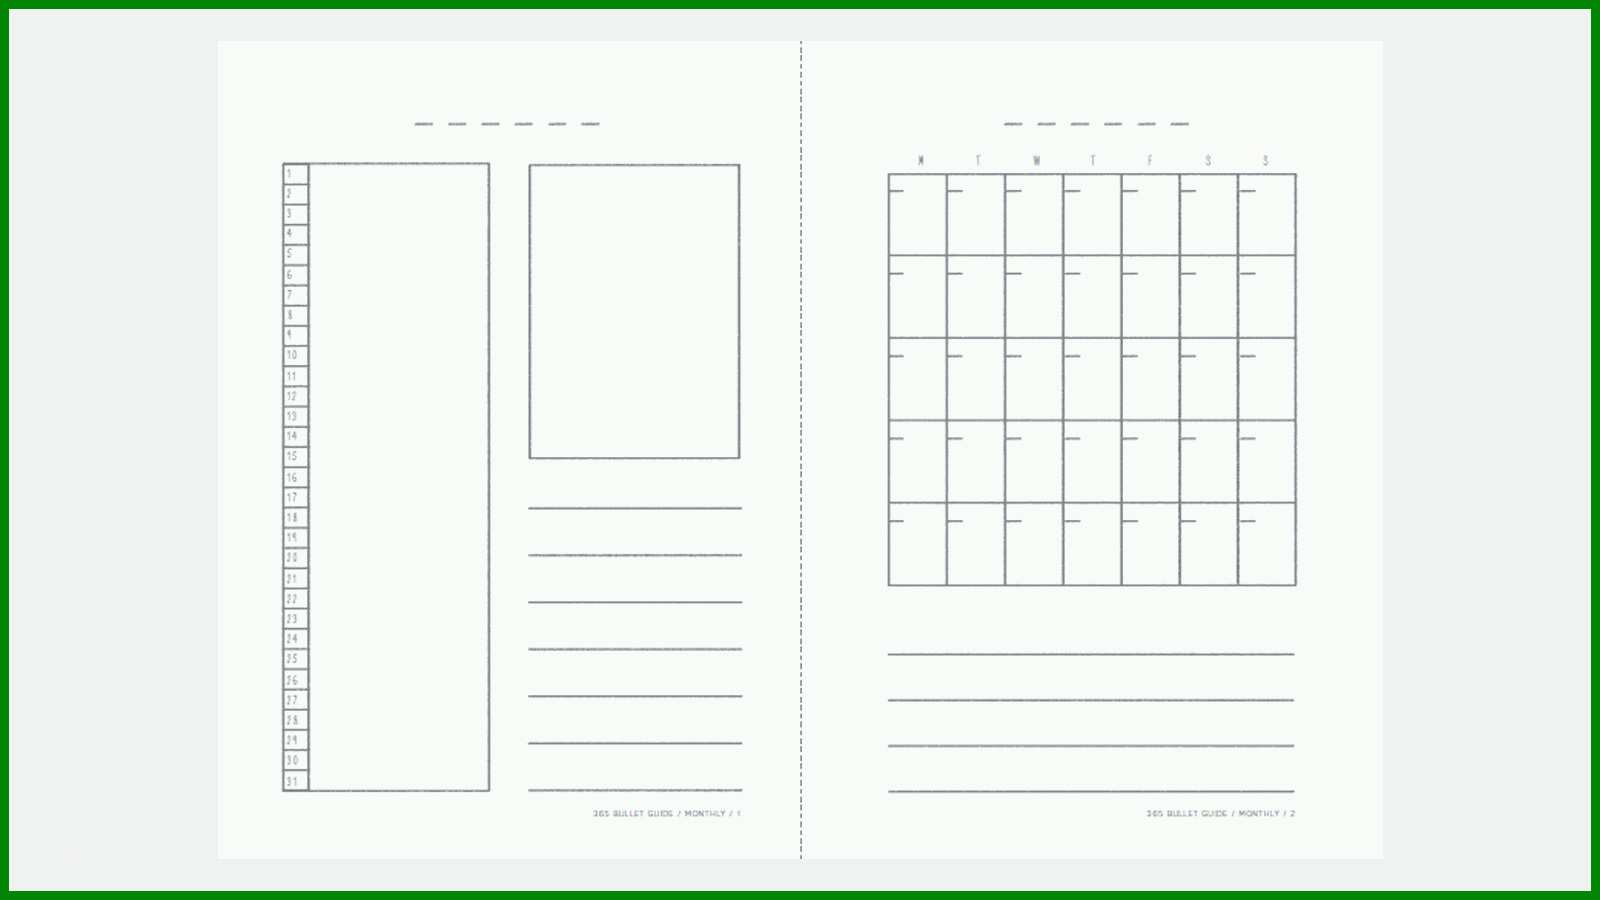 gro-artig-print-these-bullet-journal-diary-templates-for-2018-fro